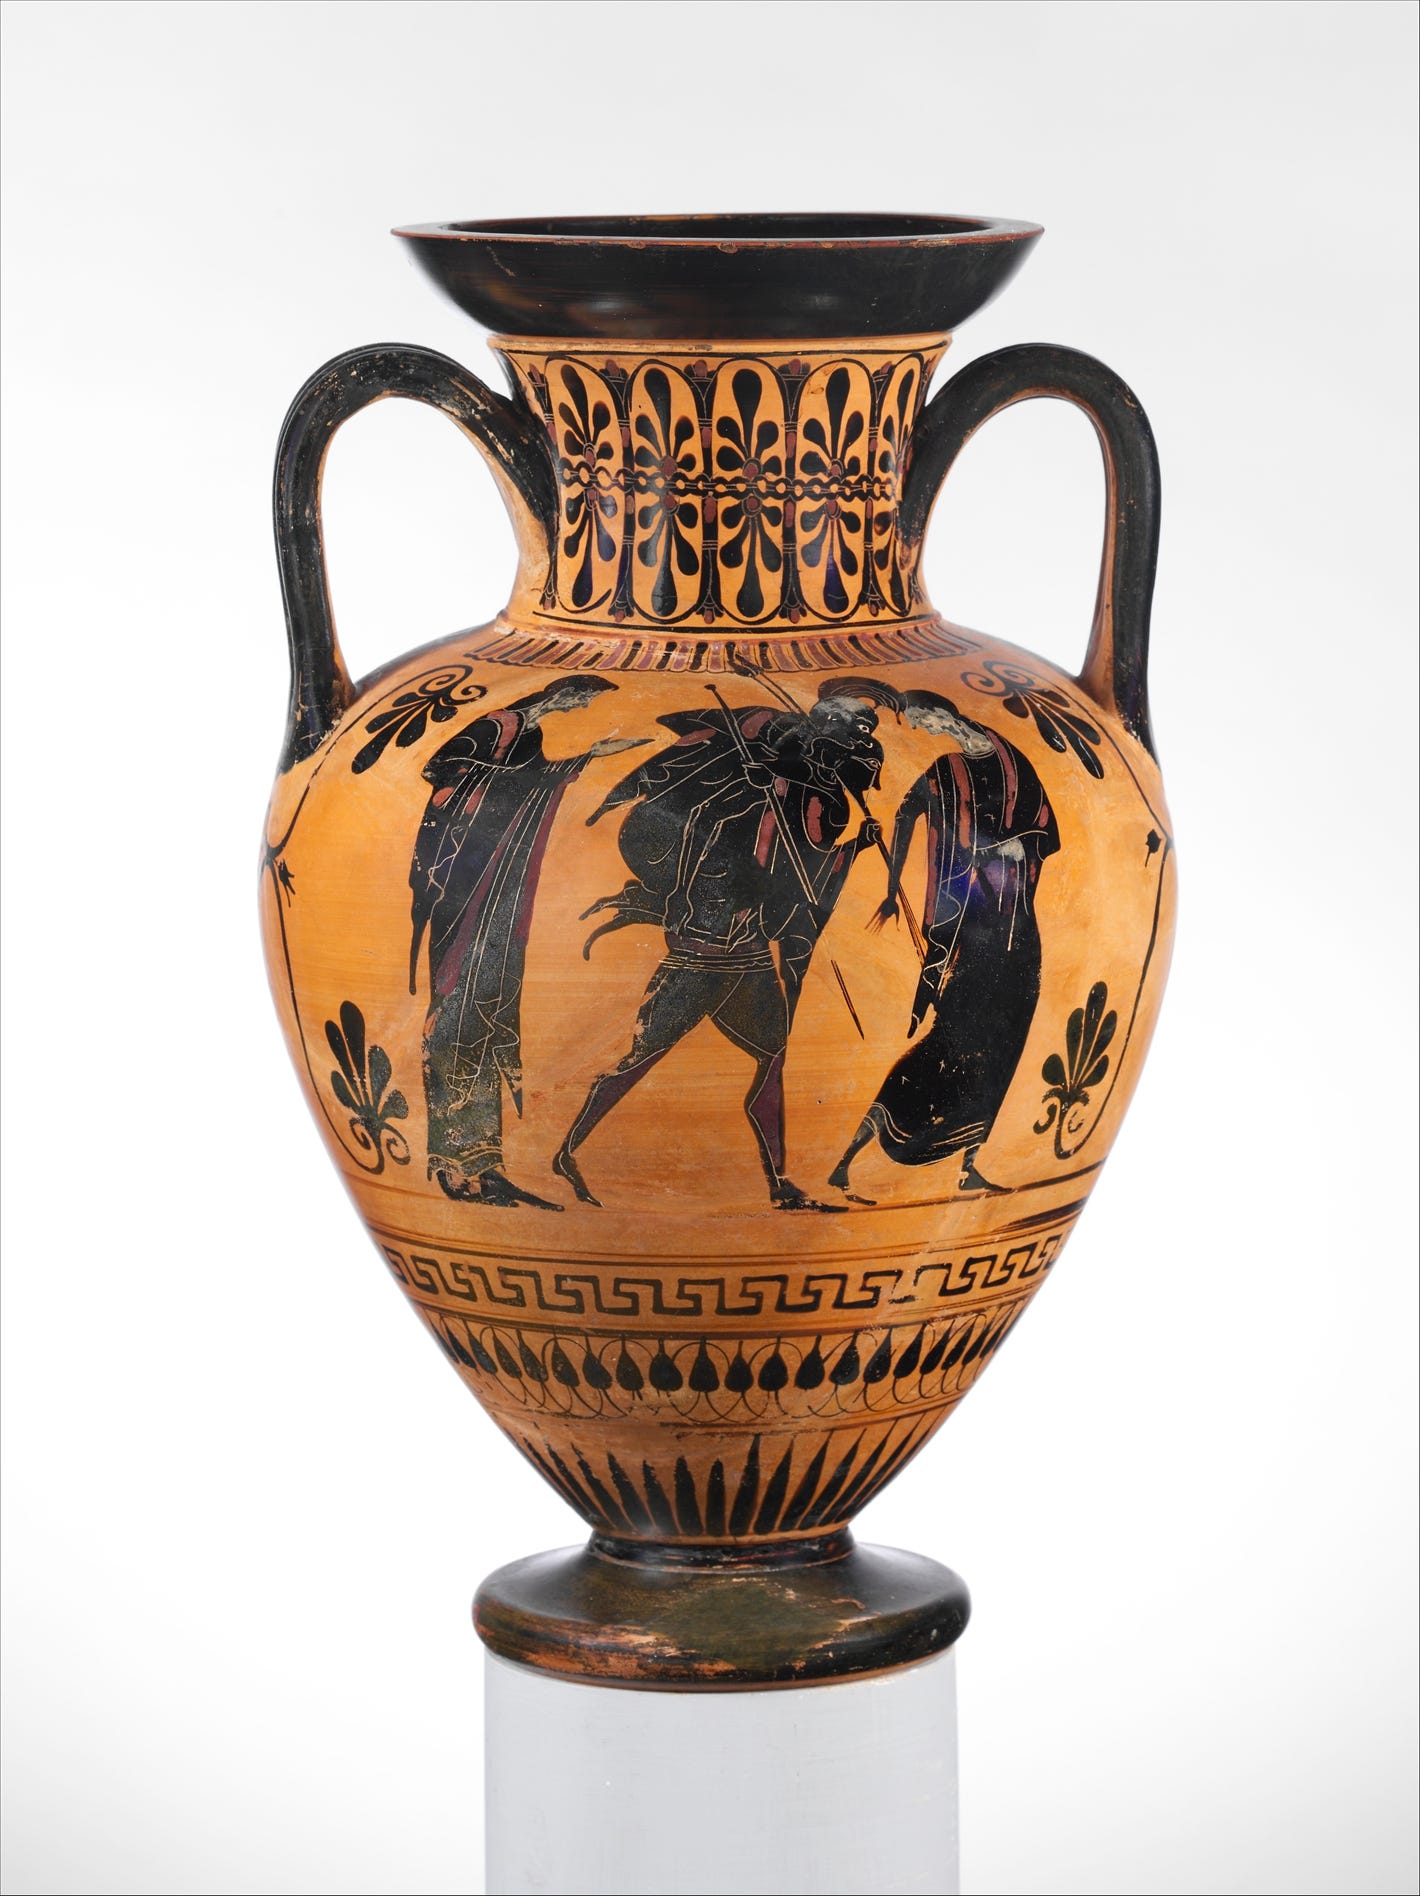 Black figure vase: Aeneas is fleeing Troy carrying his aged father on his back.